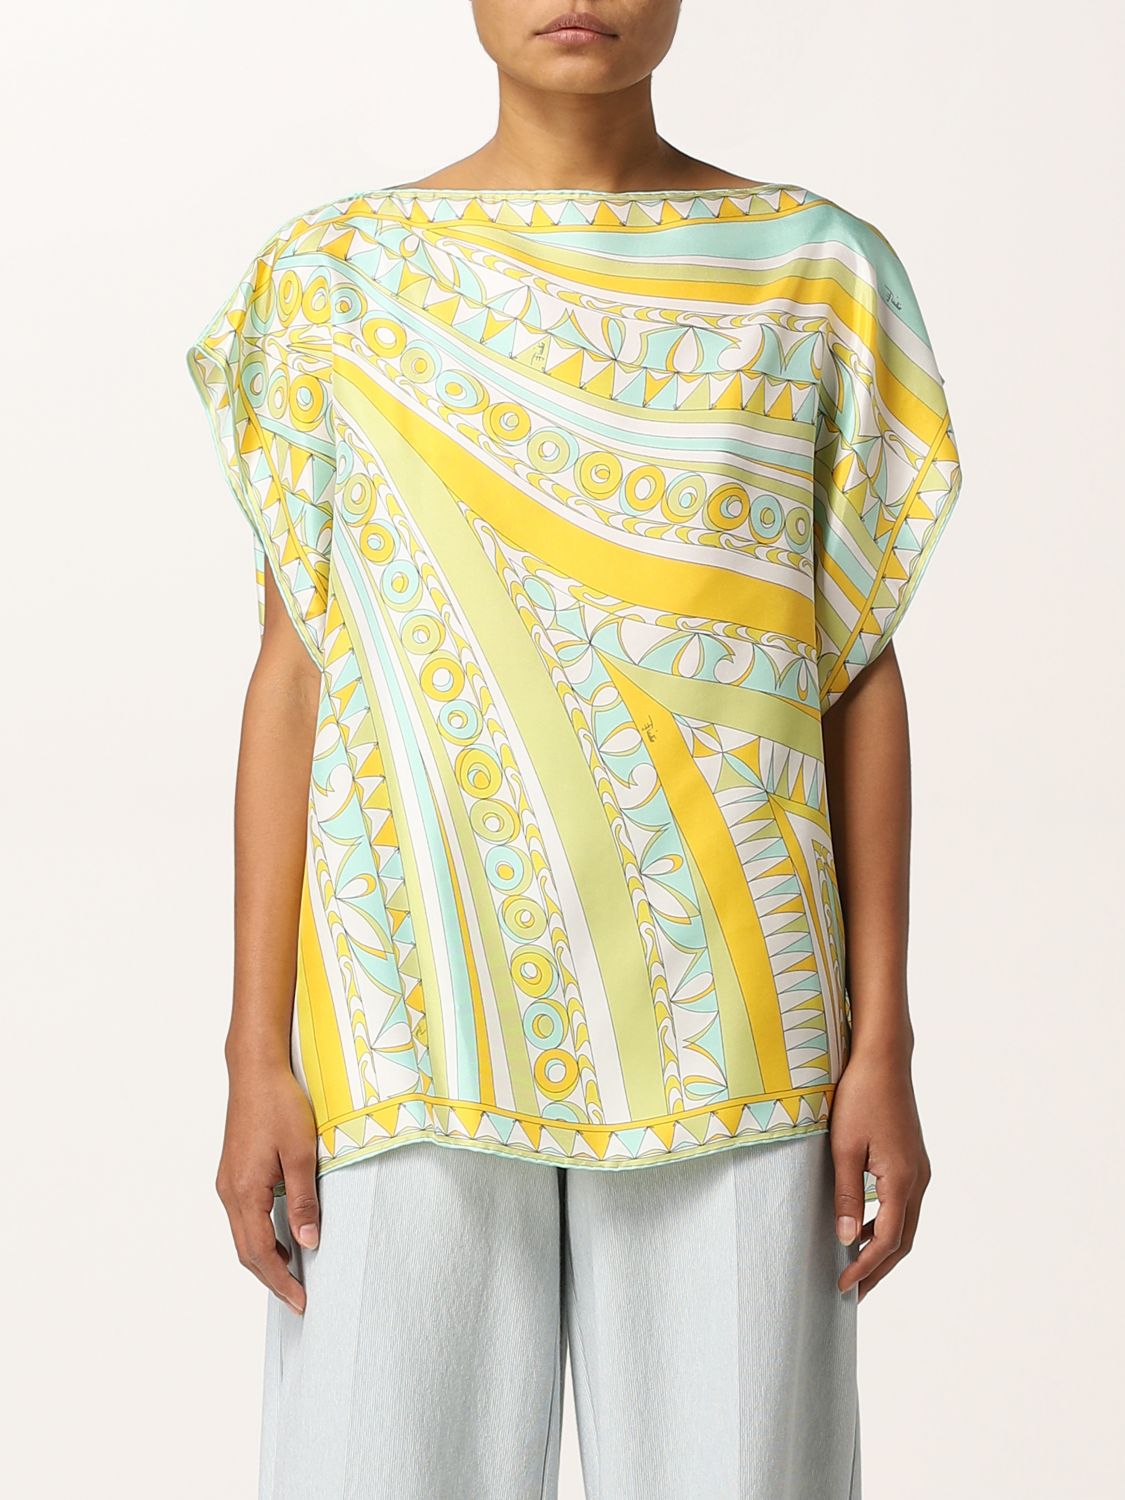 EMILIO PUCCI: kaftan top with small flags print - Water | Emilio Pucci ...